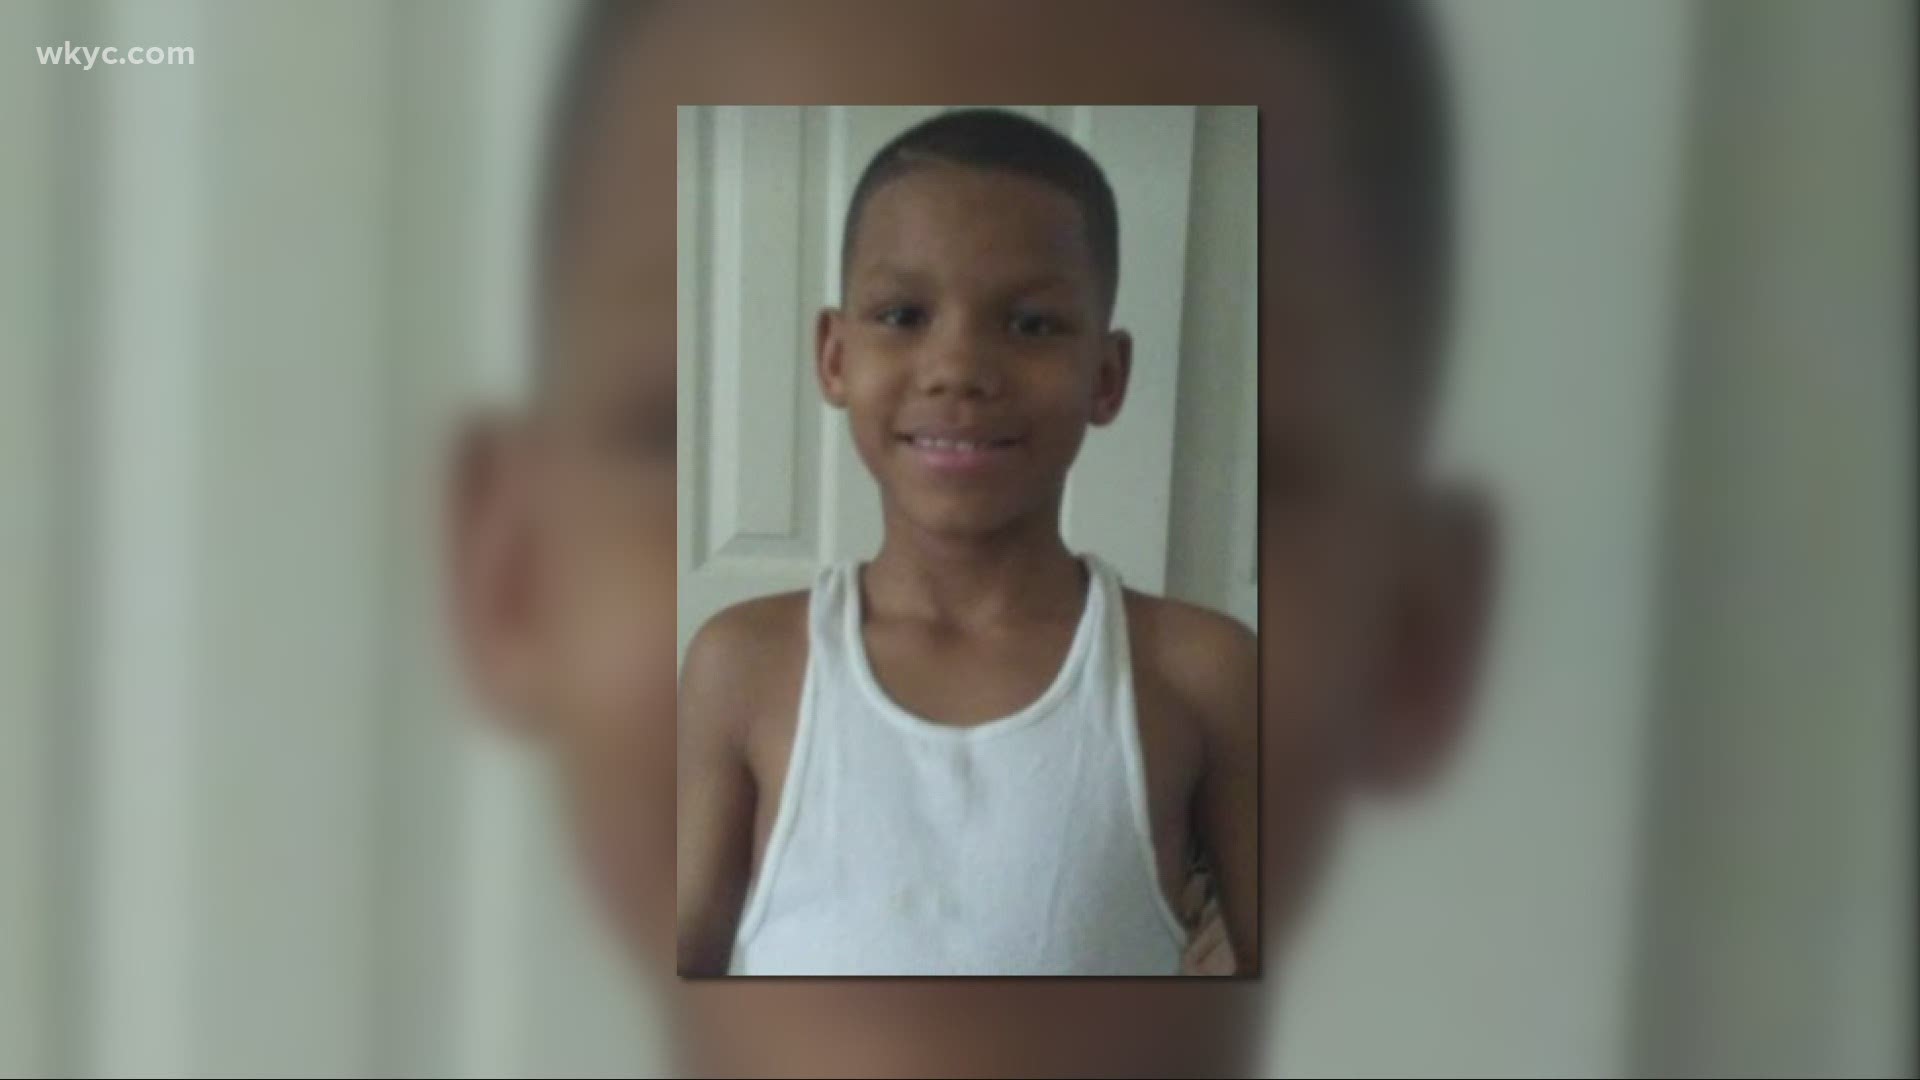 Cleveland Police needs your help. have you seen this teen? Anthony Elliot has not been seen in nearly 2 weeks.